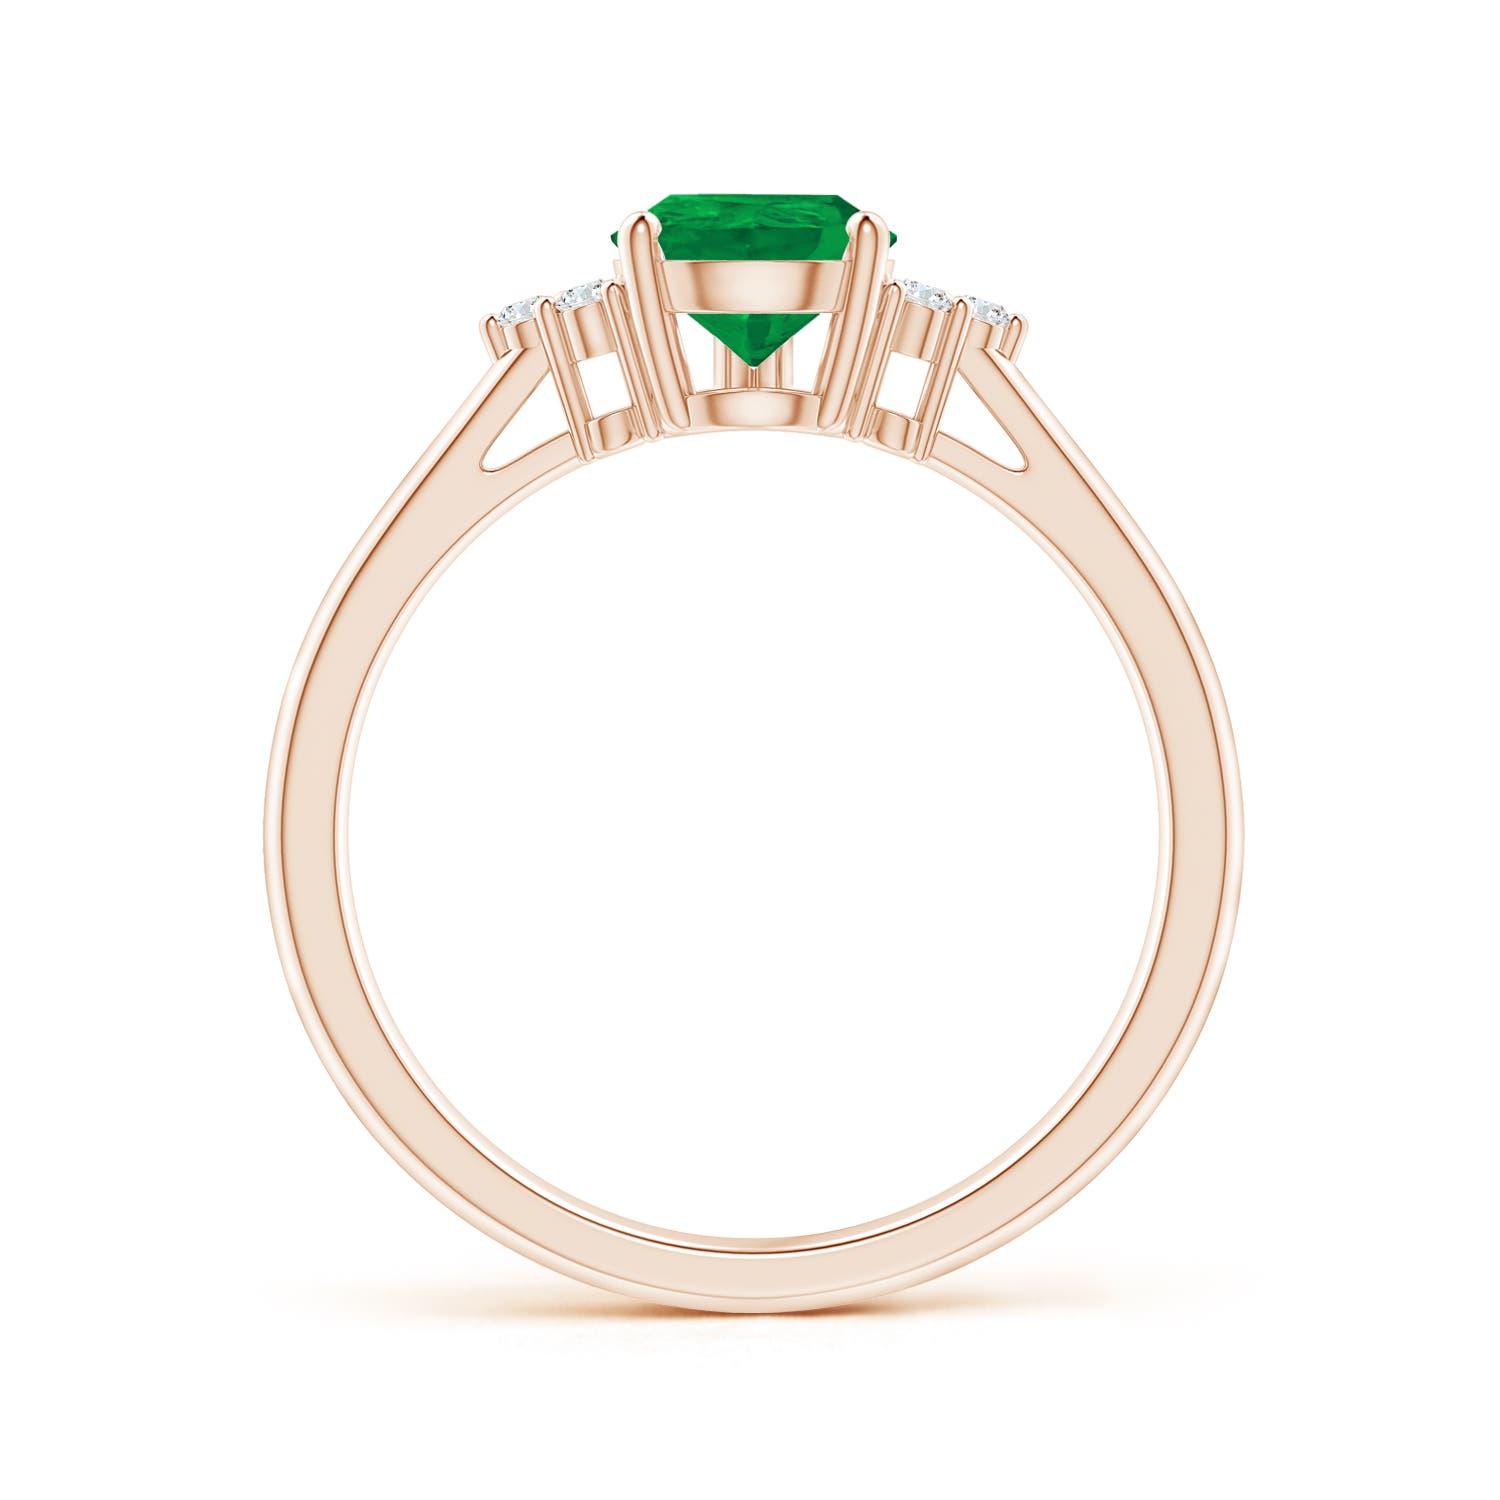 AA - Emerald / 1.02 CT / 14 KT Rose Gold